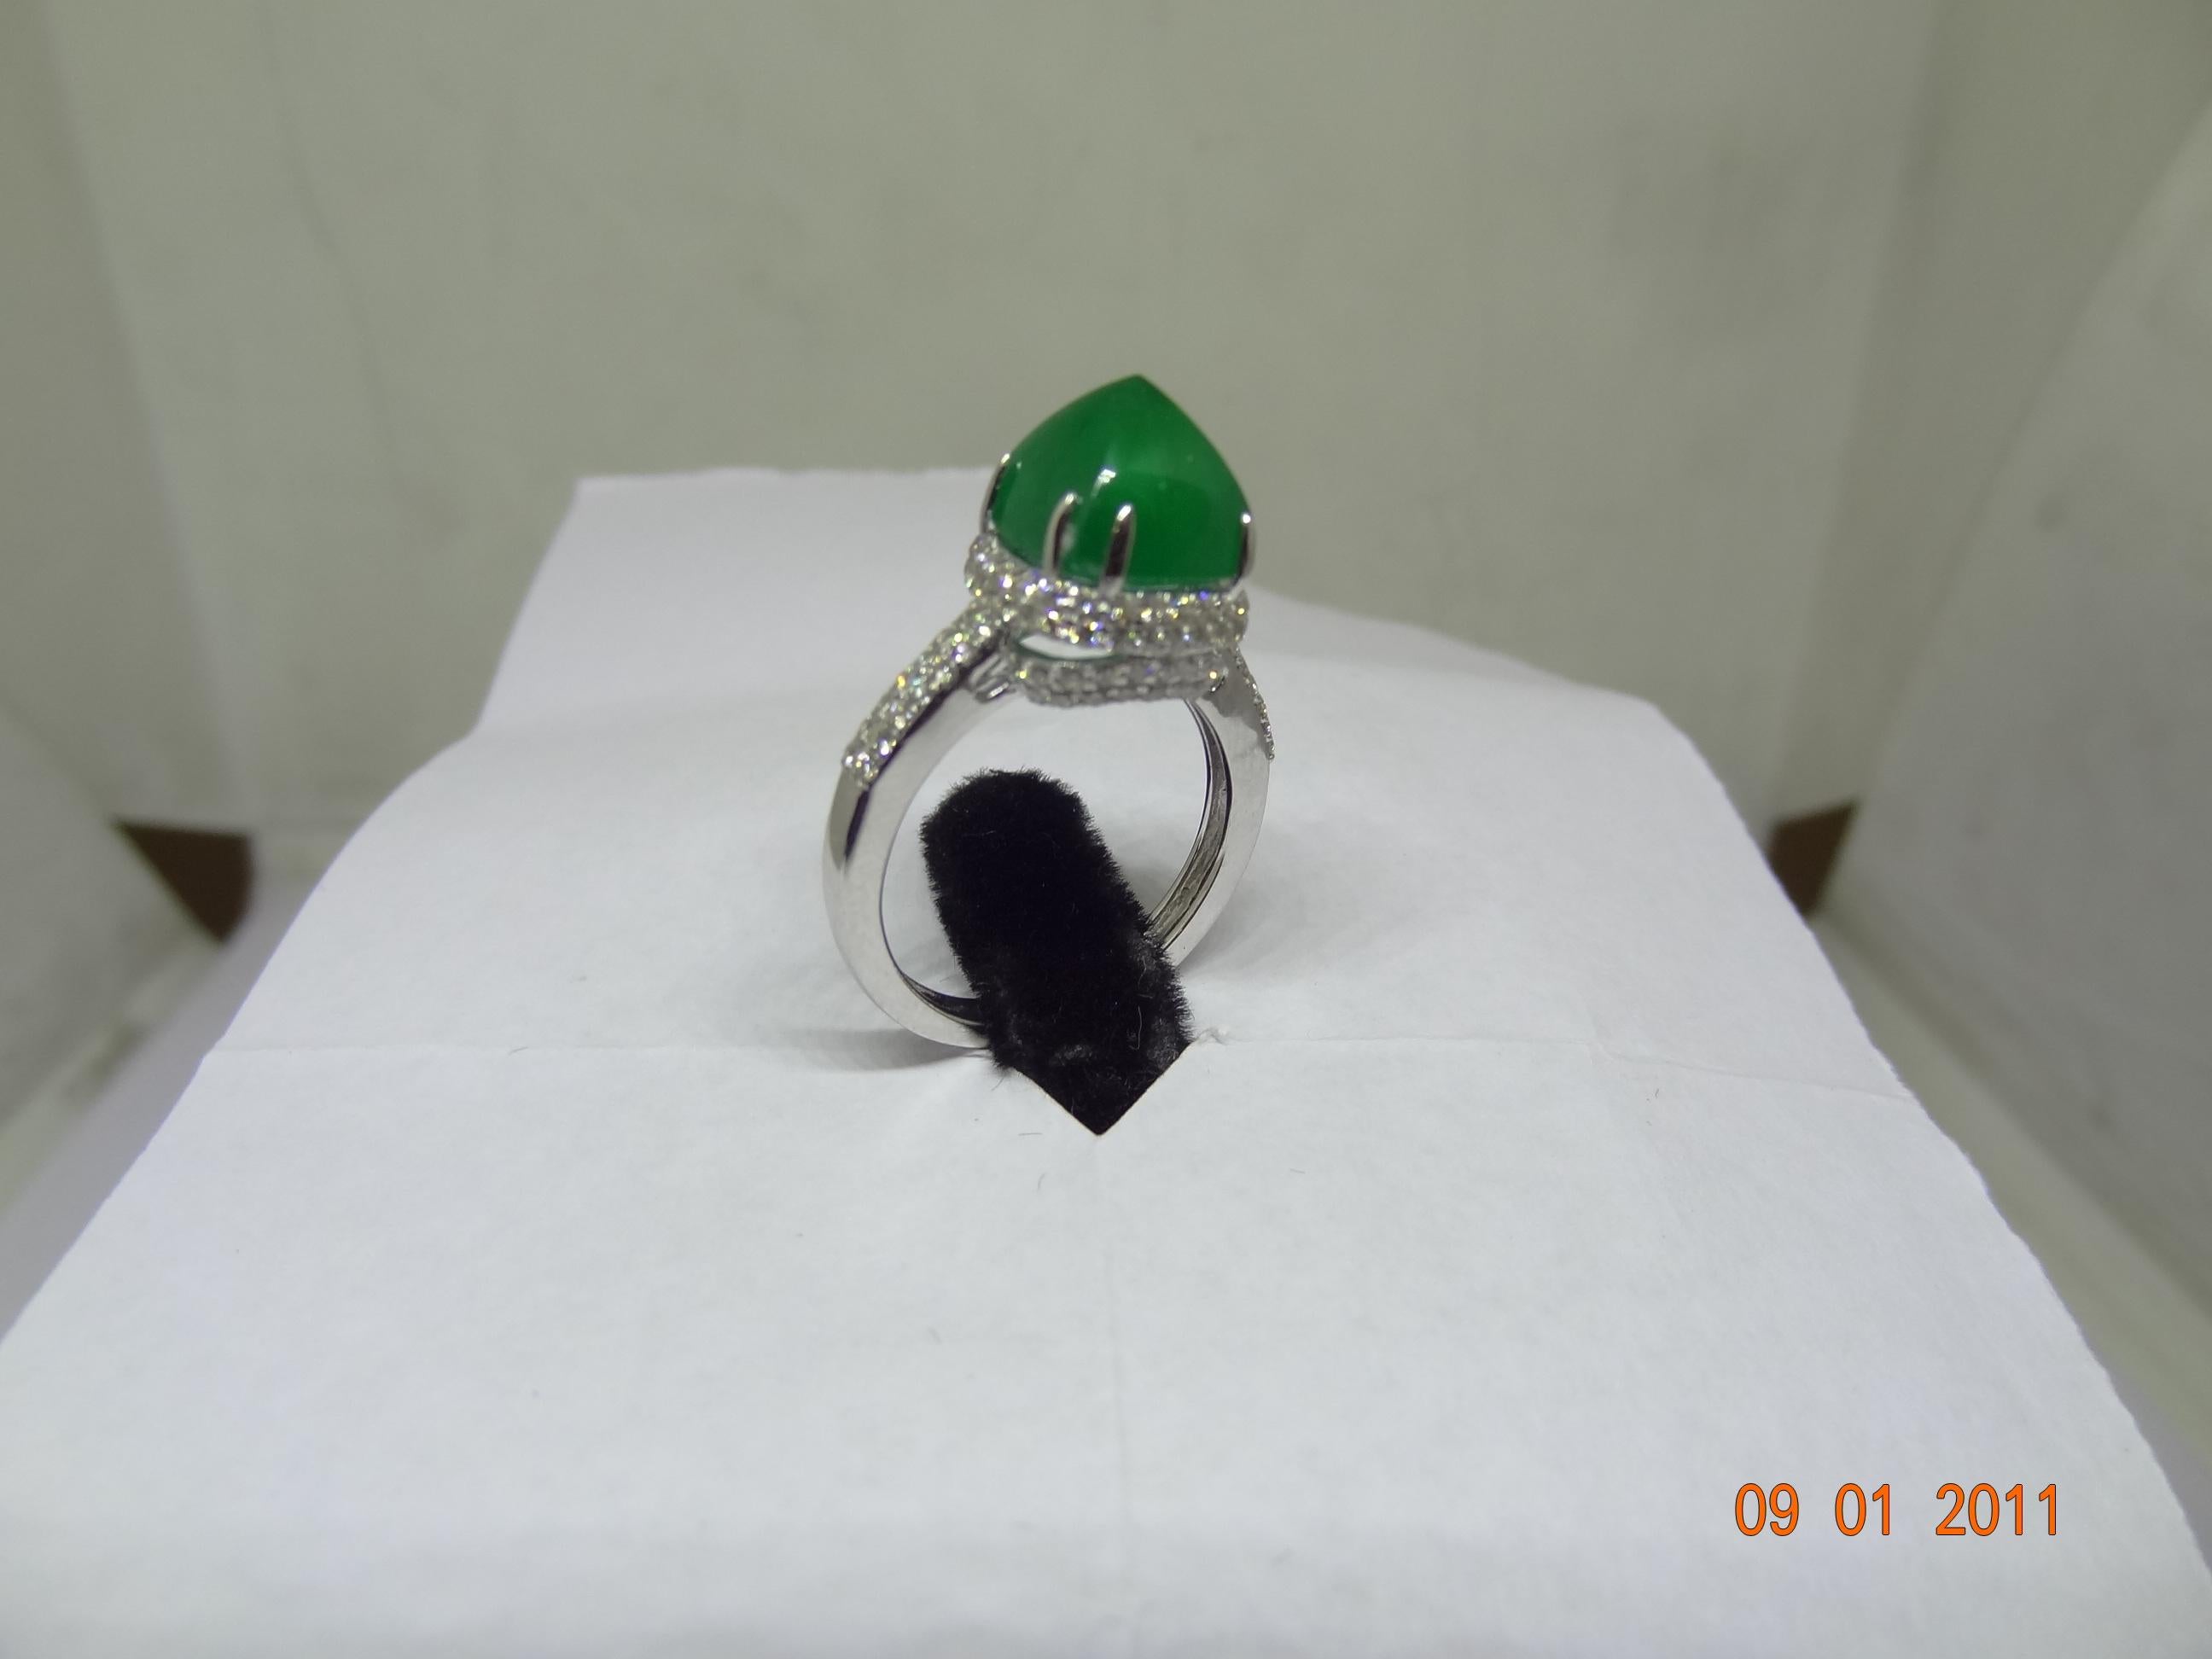 This is a natural Zambian Emerald ring with diamonds and 14k gold. The emeralds are very high quality and very good quality diamonds the clarity is vsi and G colour


Emeralds : 4.88 carats
diamonds : 0.75 carats
gold : 3.58 GM

This is a brand new